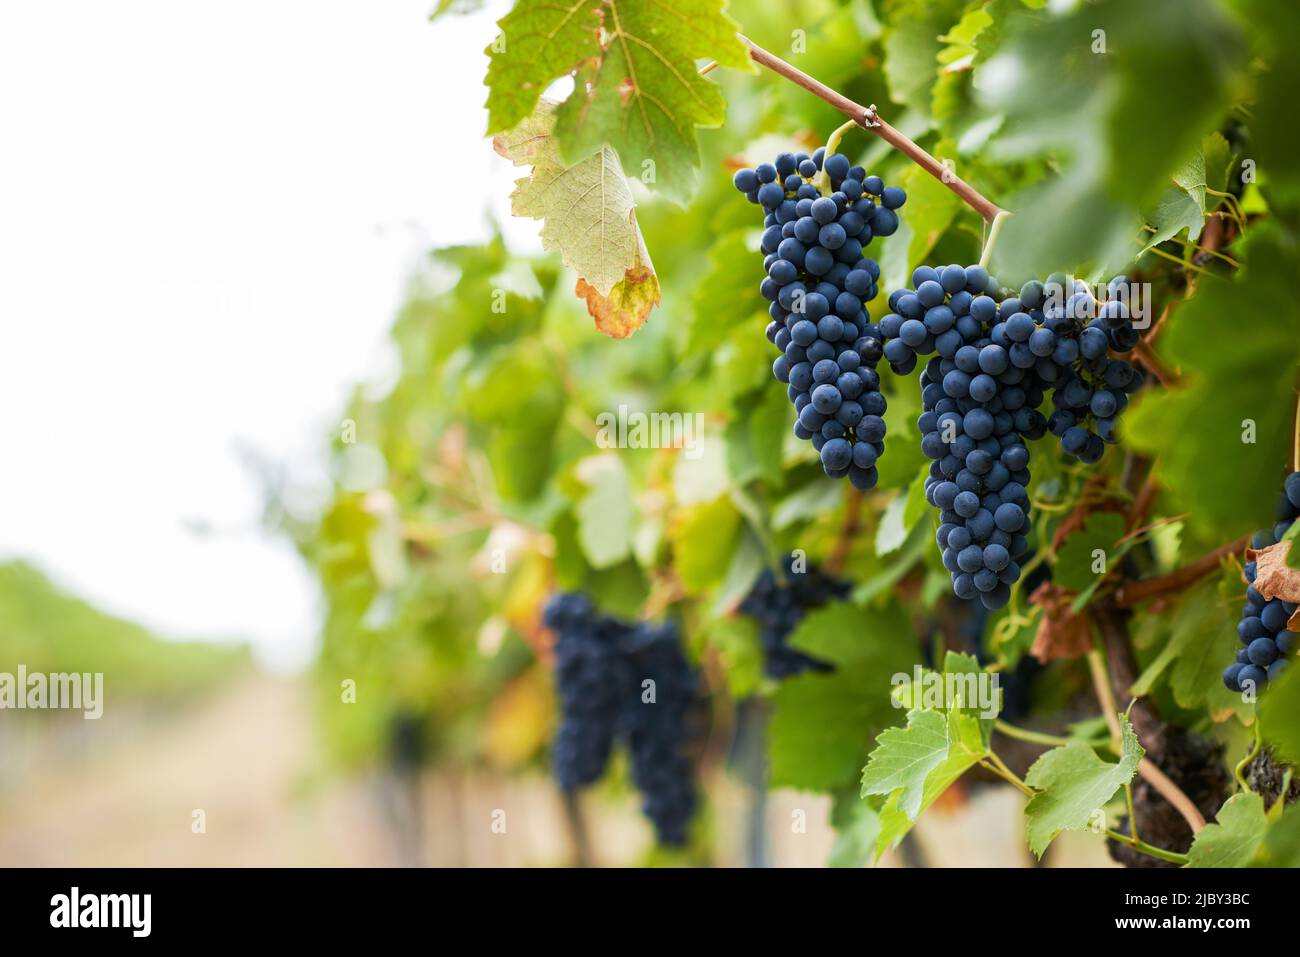 Purple grapes hanging from grapevines in vineyard Stock Photo